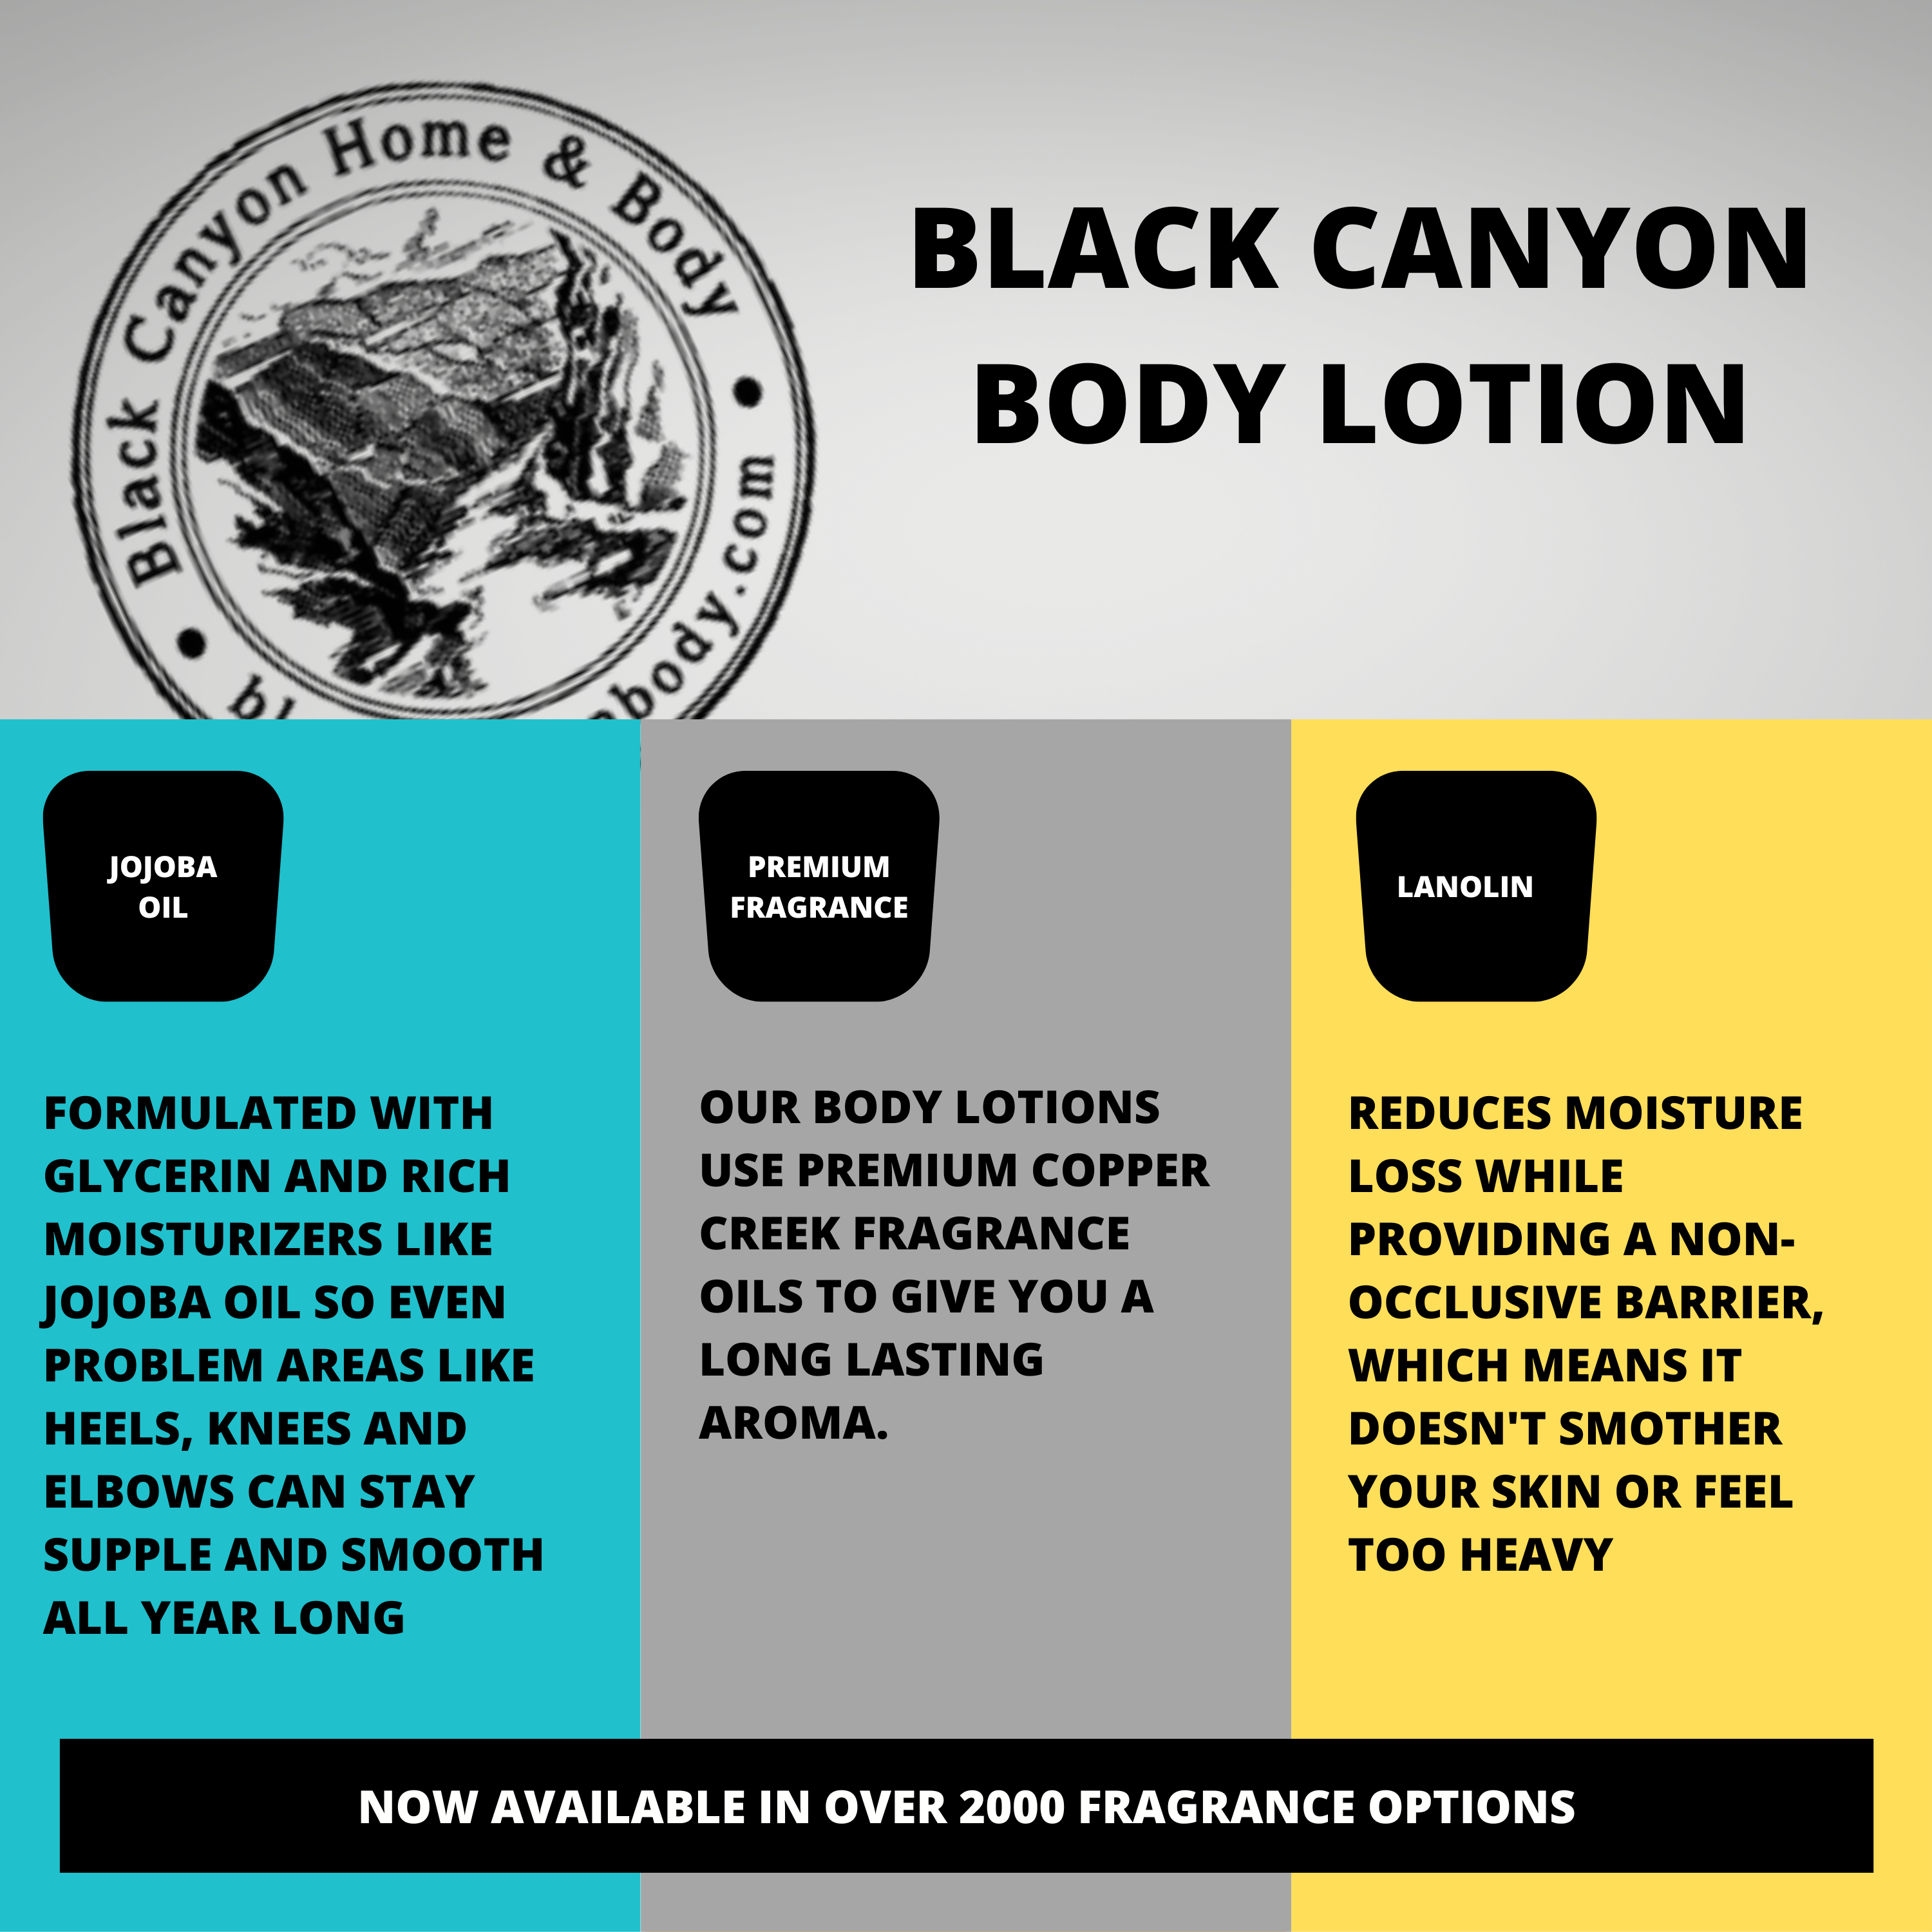 Black Canyon Berry Shortcake & Whipped Cream Scented Luxury Body Lotion with Lanolin and Jojoba Oil